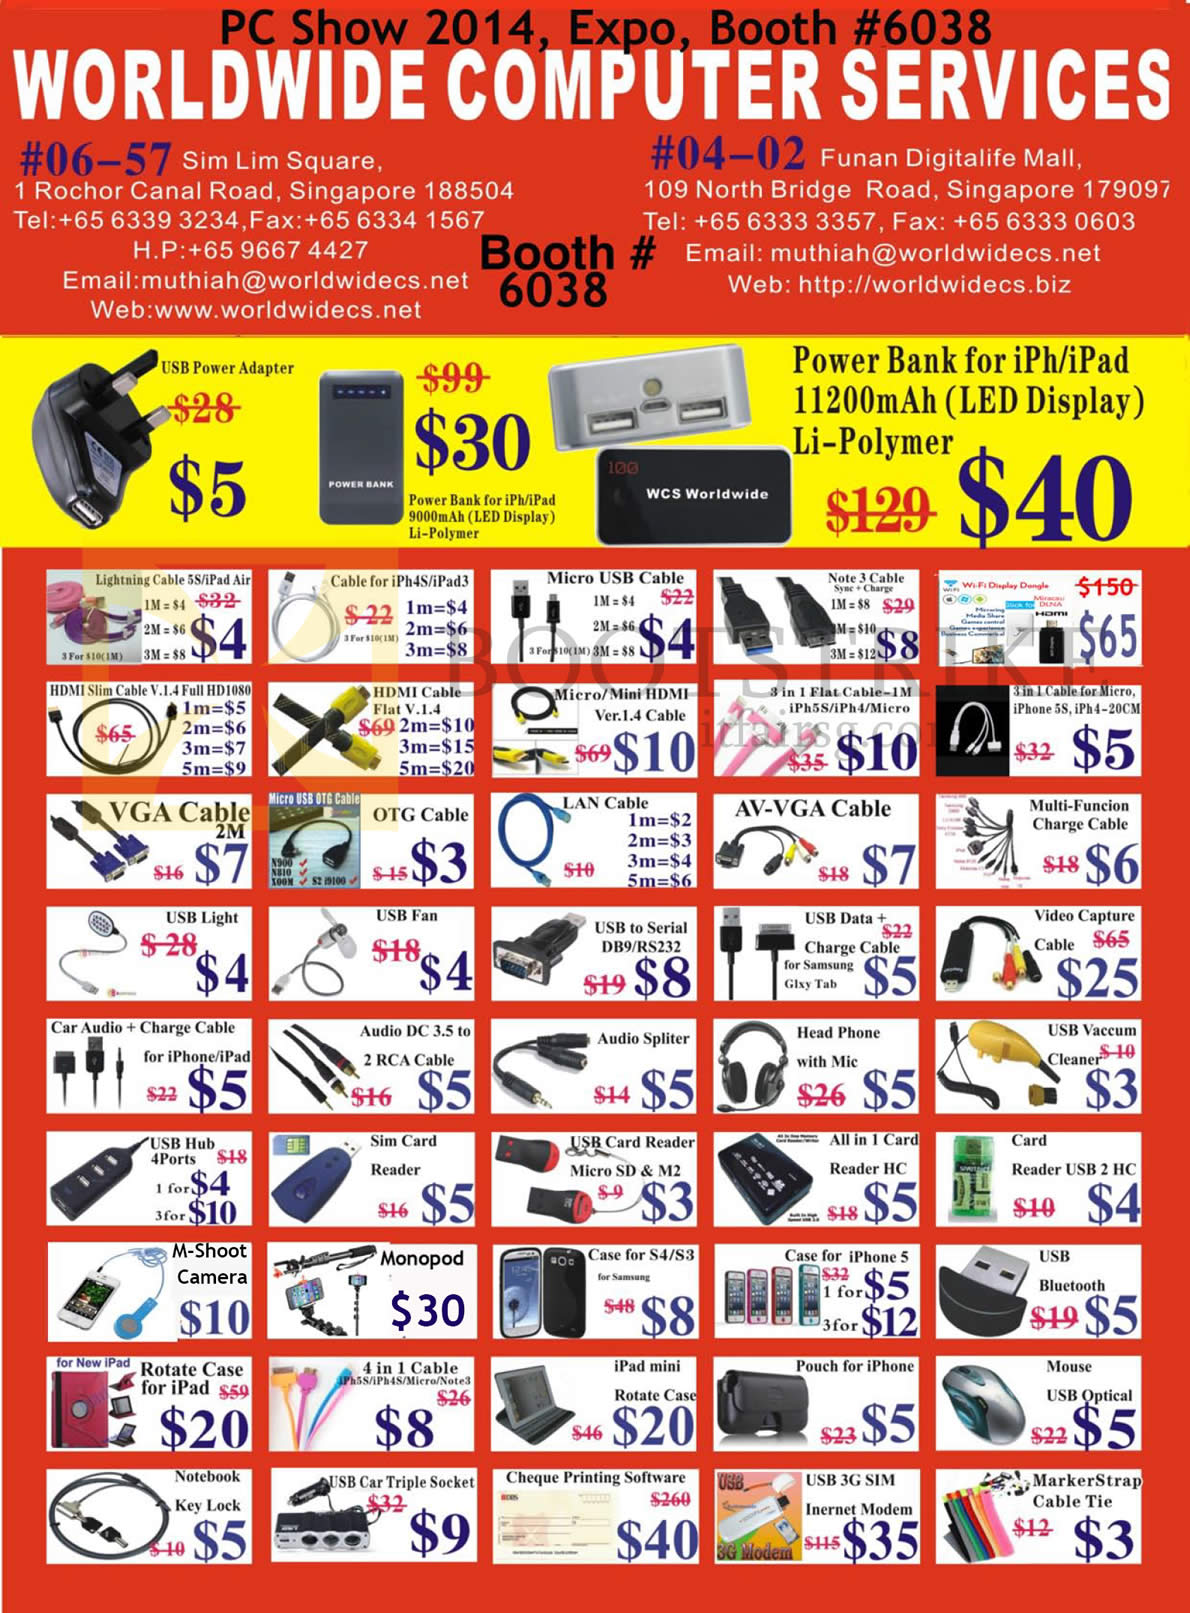 PC SHOW 2014 price list image brochure of Worldwide Computer Services Accessories Cable, IPhone Case, Ipad Case, Rotate Cases, USB 3G Sim, HDMI, Video Capture